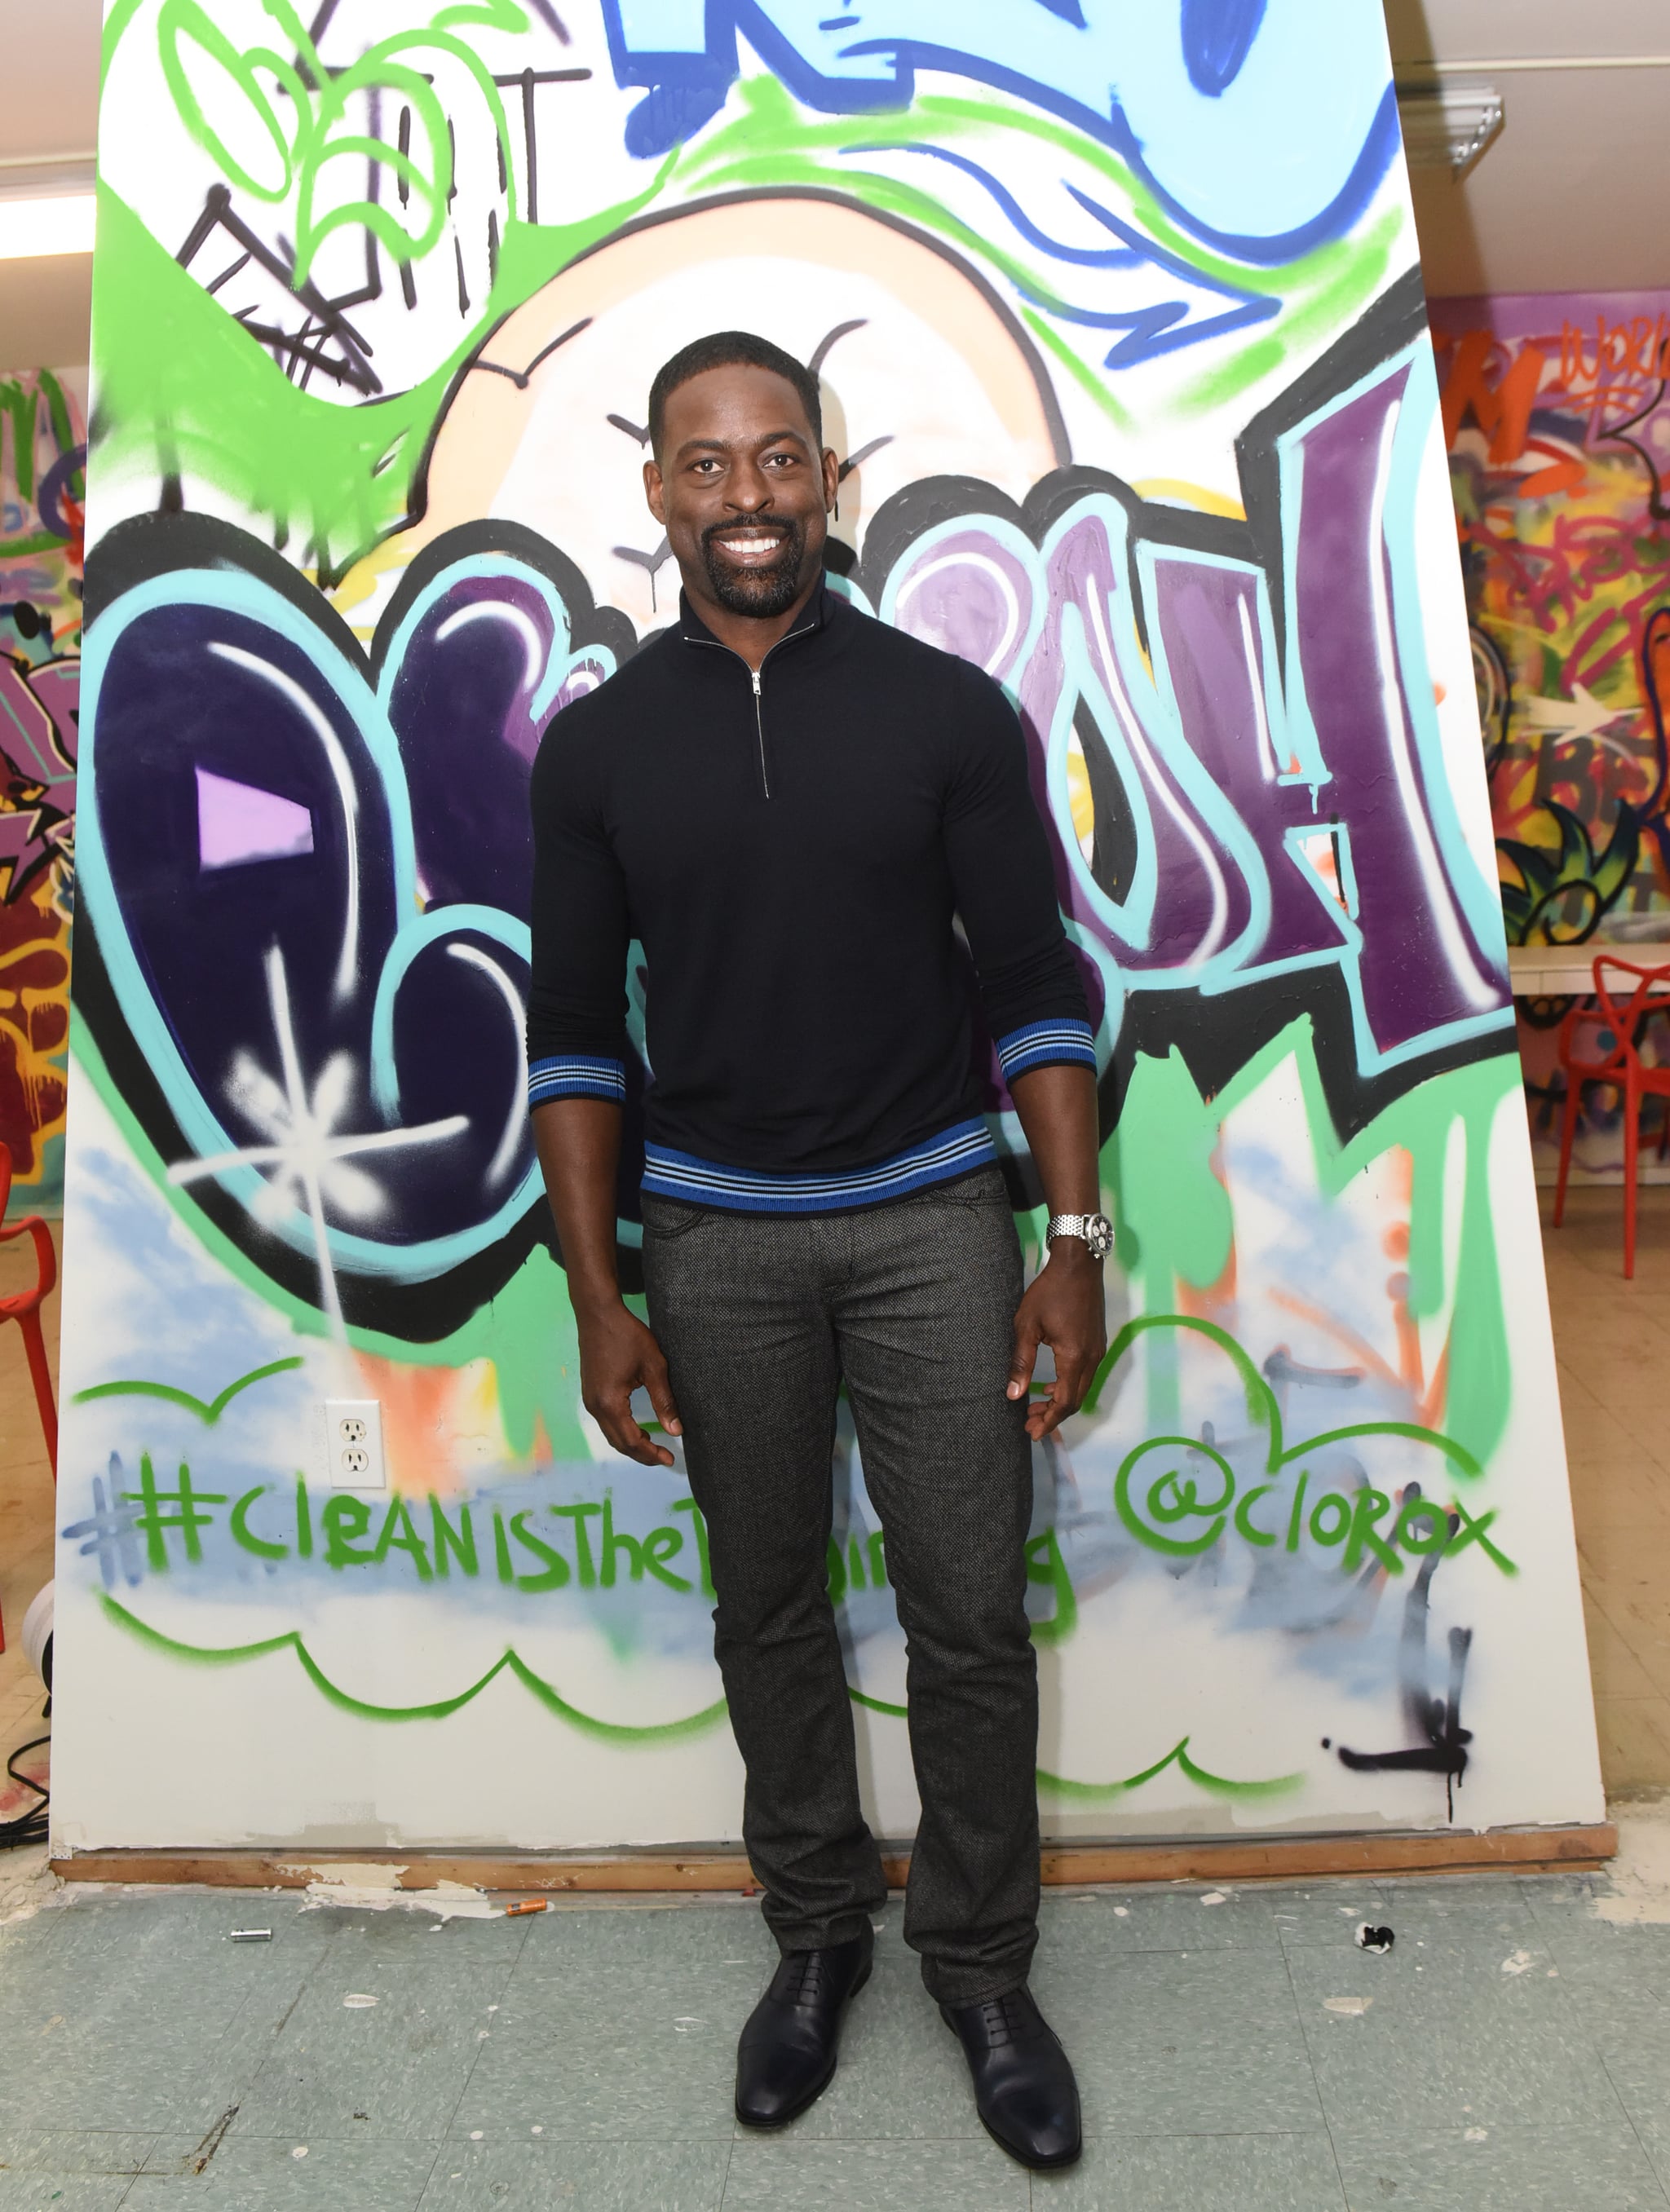 Award-winning actor Sterling K. Brown joins Clorox and Thrive Collective to celebrate the transformative power of clean at a new Youth Opportunity Hub in Harlem, New York, Tuesday, Feb. 27, 2018. The space was cleaned with a grant from Clorox and the help of 250 community volunteers to create new possibilities for youth as an arts hub and mentoring center. (Photo by Diane Bondareff/Invision for Clorox/AP Images)